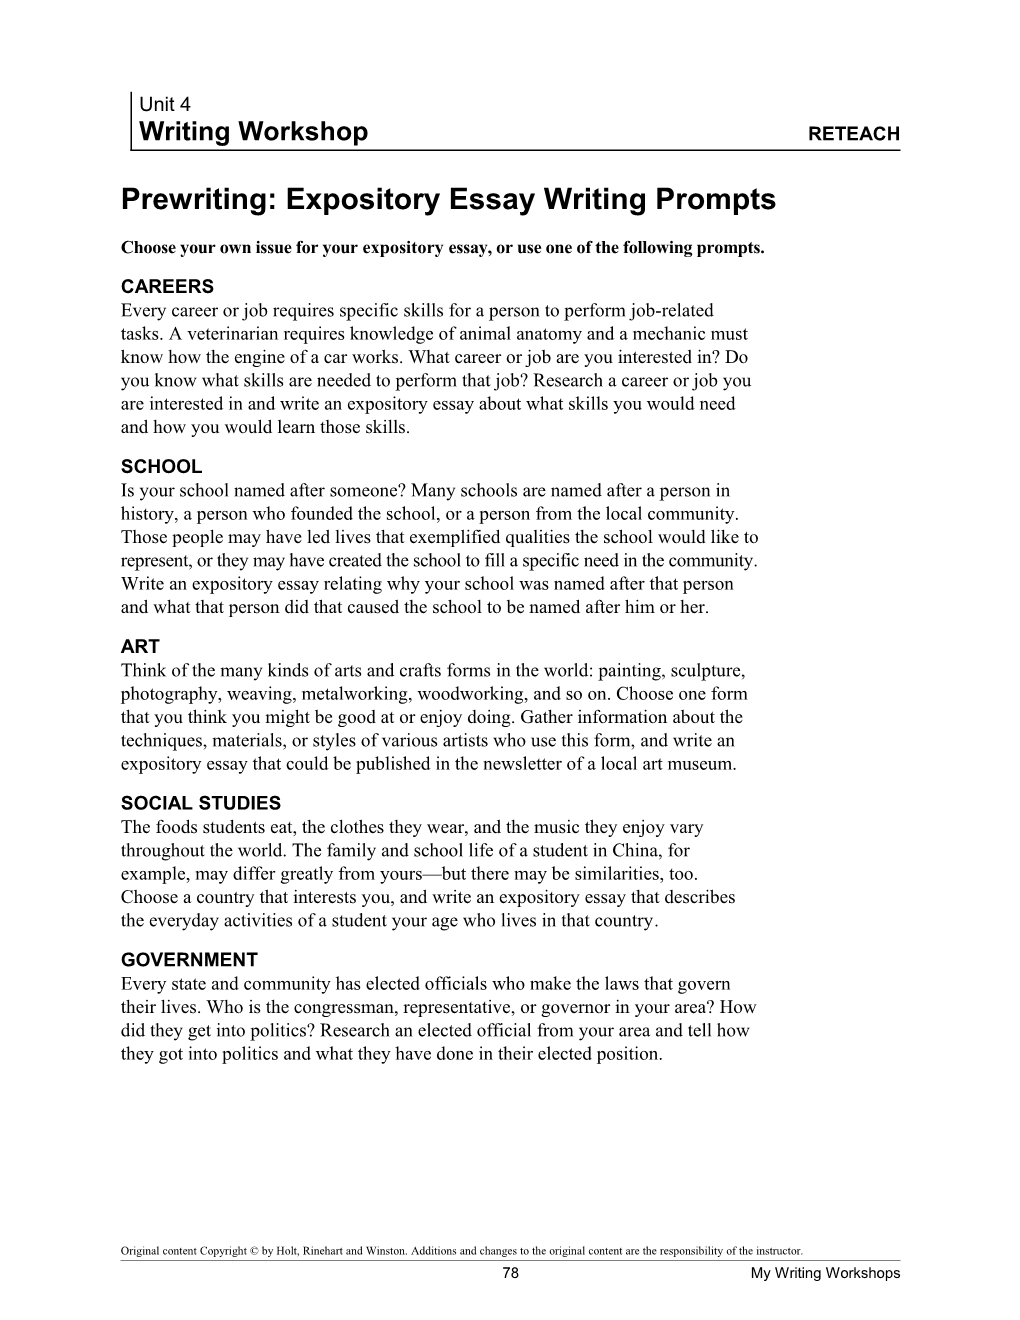 Prewriting: Expository Essay Writing Prompts